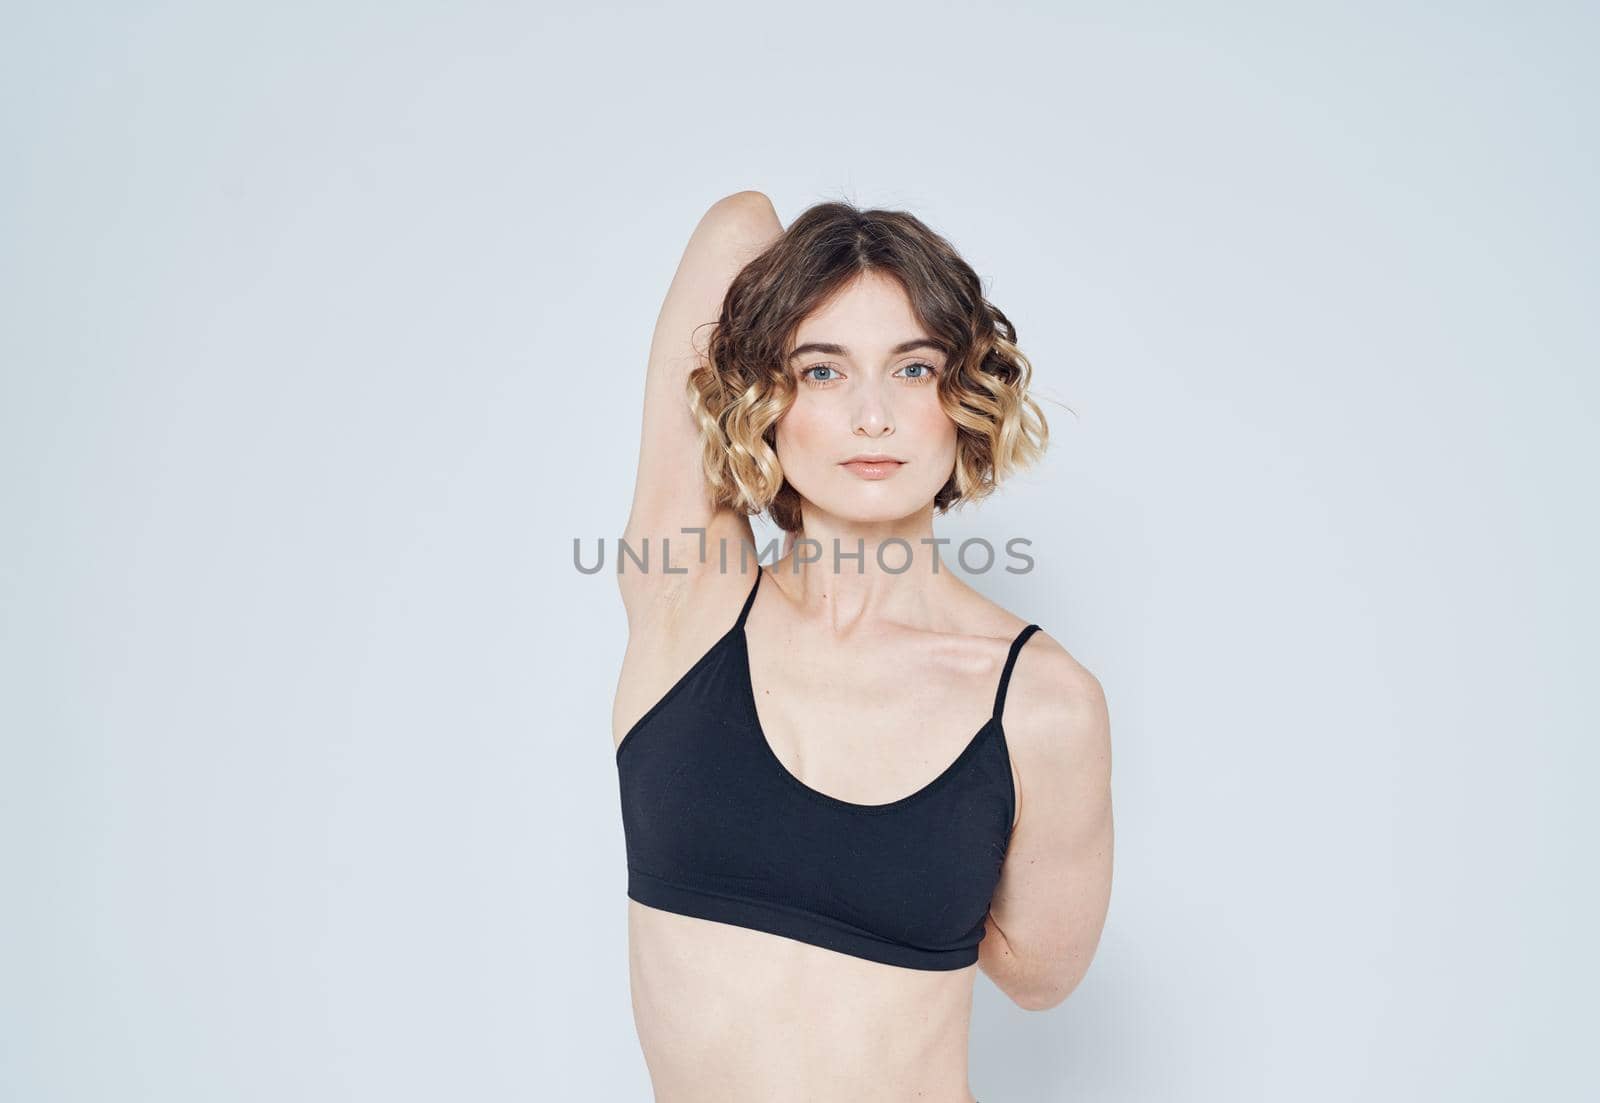 A strange woman in a short T-shirt has joined her hands behind her back on a light background by SHOTPRIME